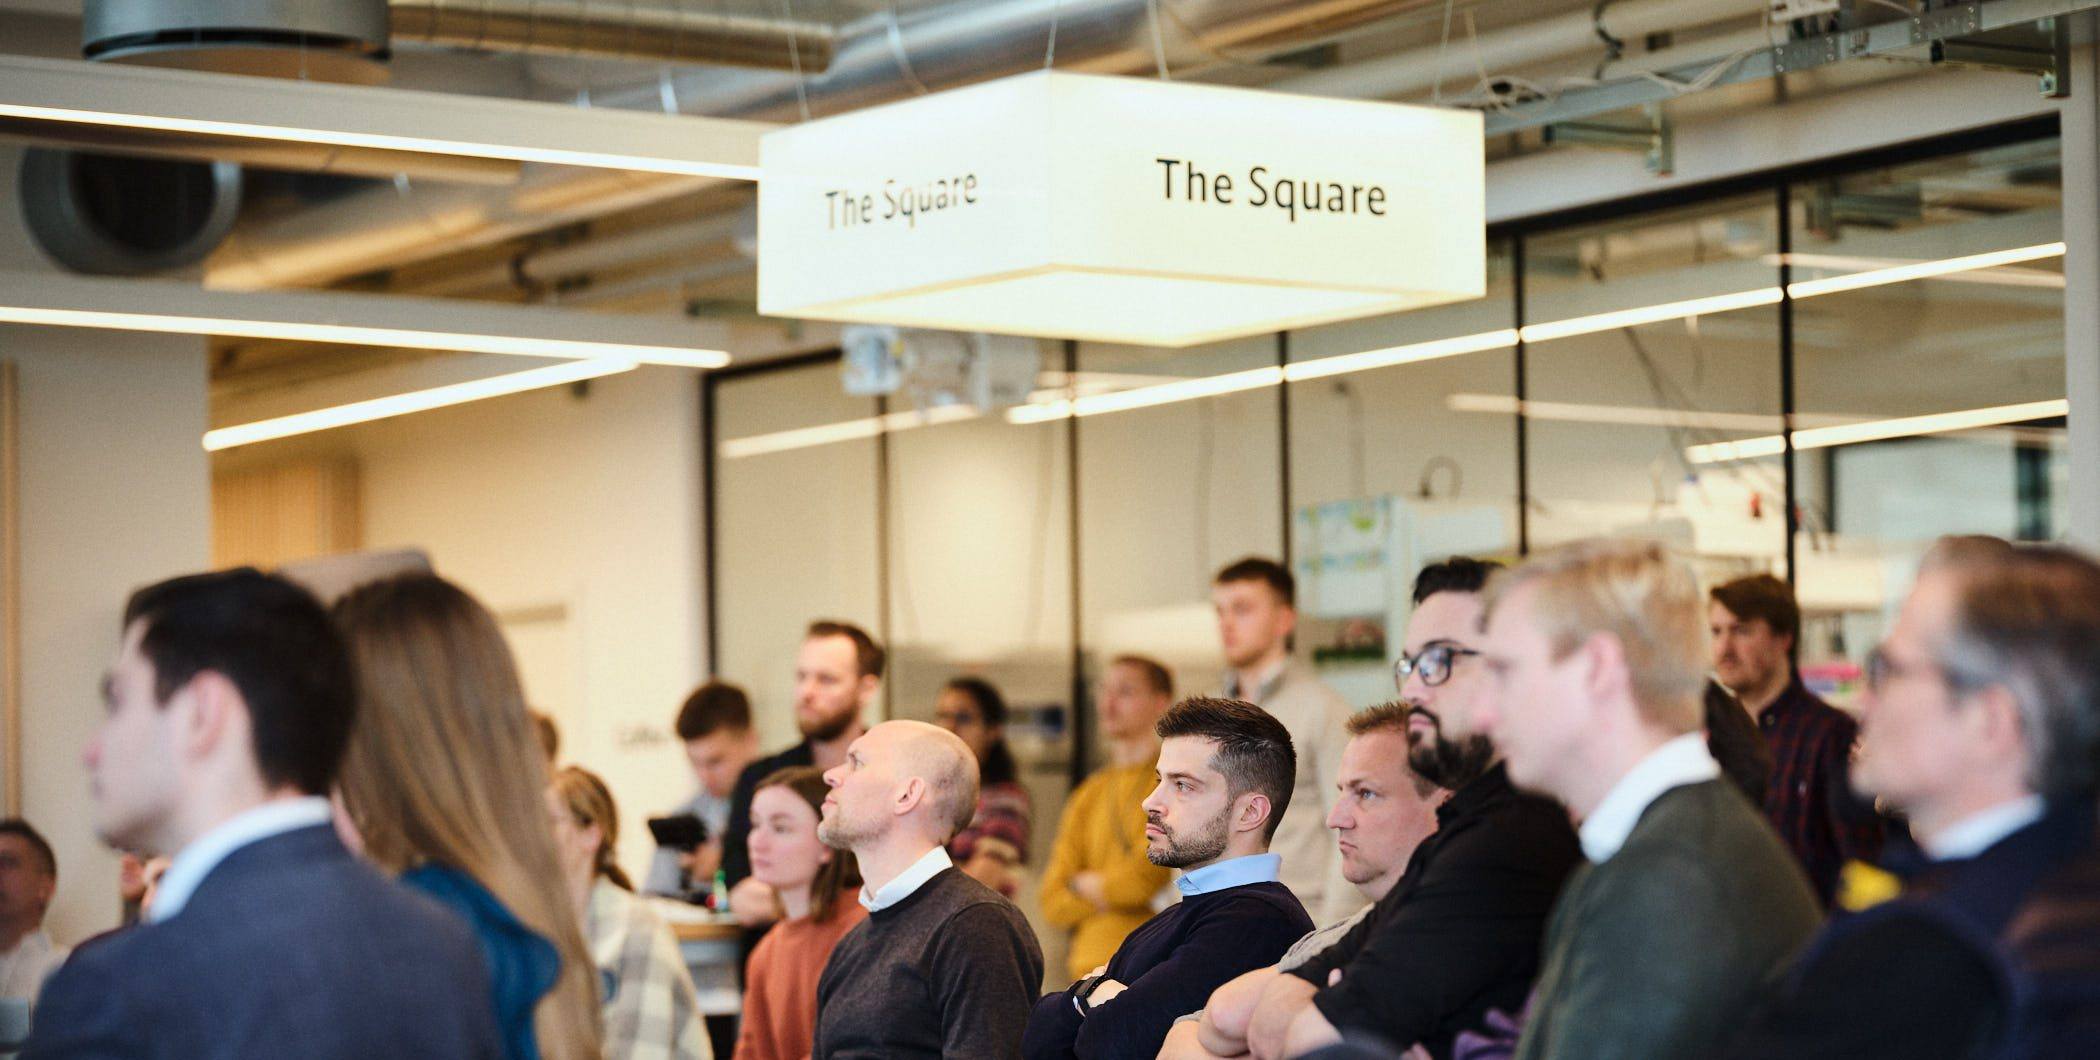 Talks at the Square - BioInnovation Institute